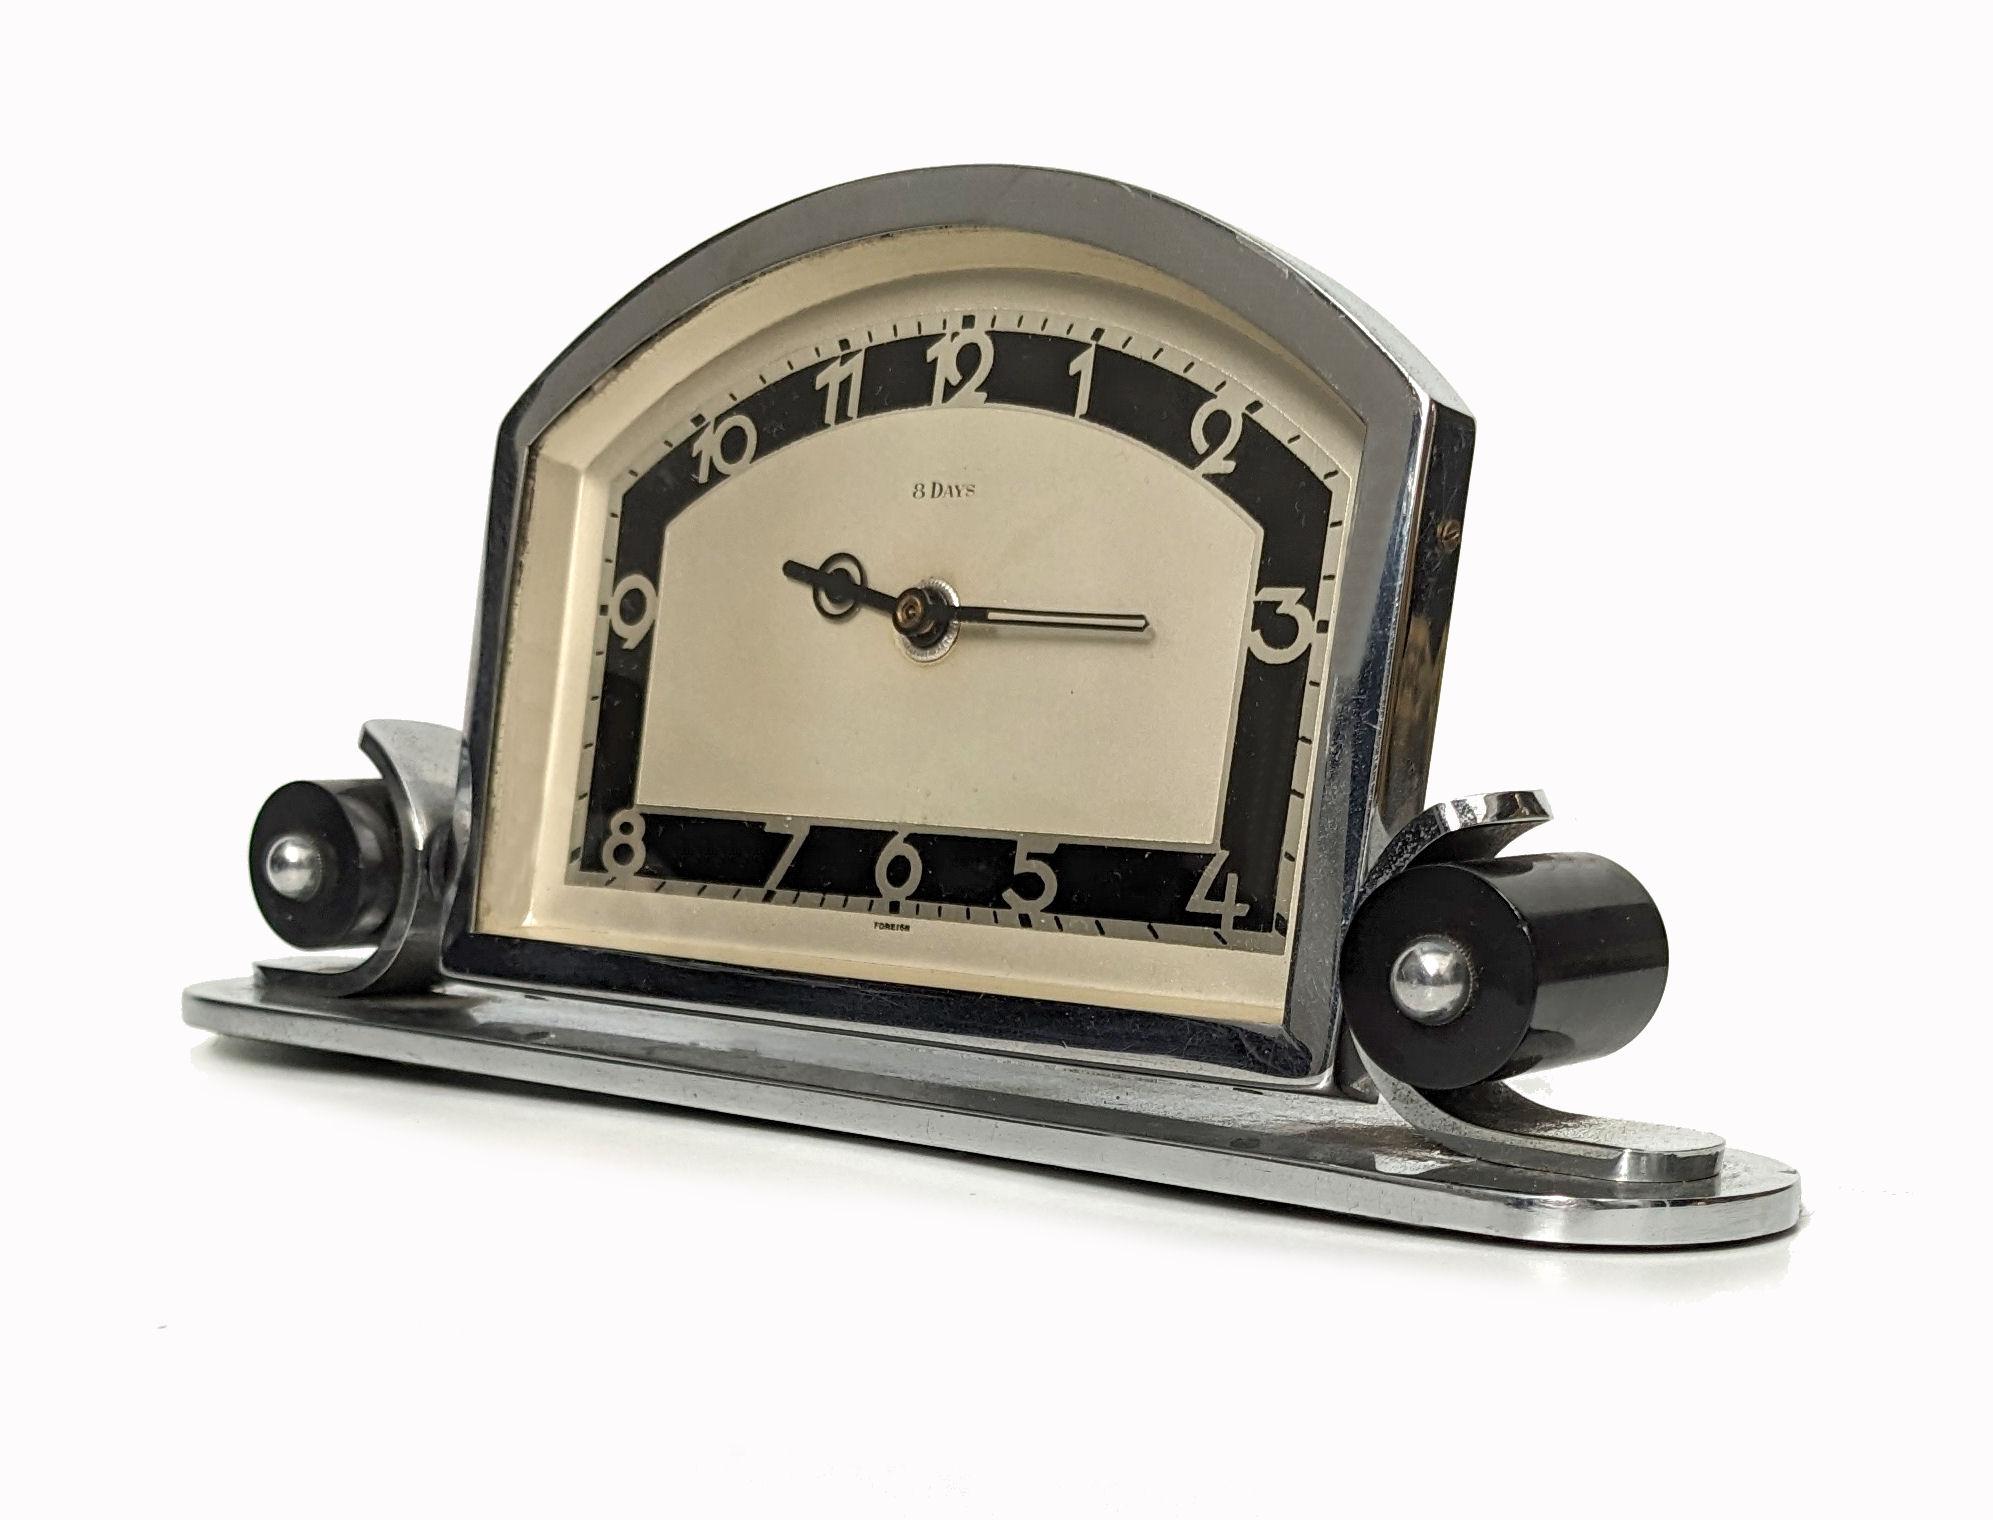 Free standing Chrome Art Deco table/ desk clock, made In Germany. Wind up manual 8 day movement which has been serviced and so comes to you in good working condition. It's in very good vintage condition cosmetically for its 90 odd years, the chrome